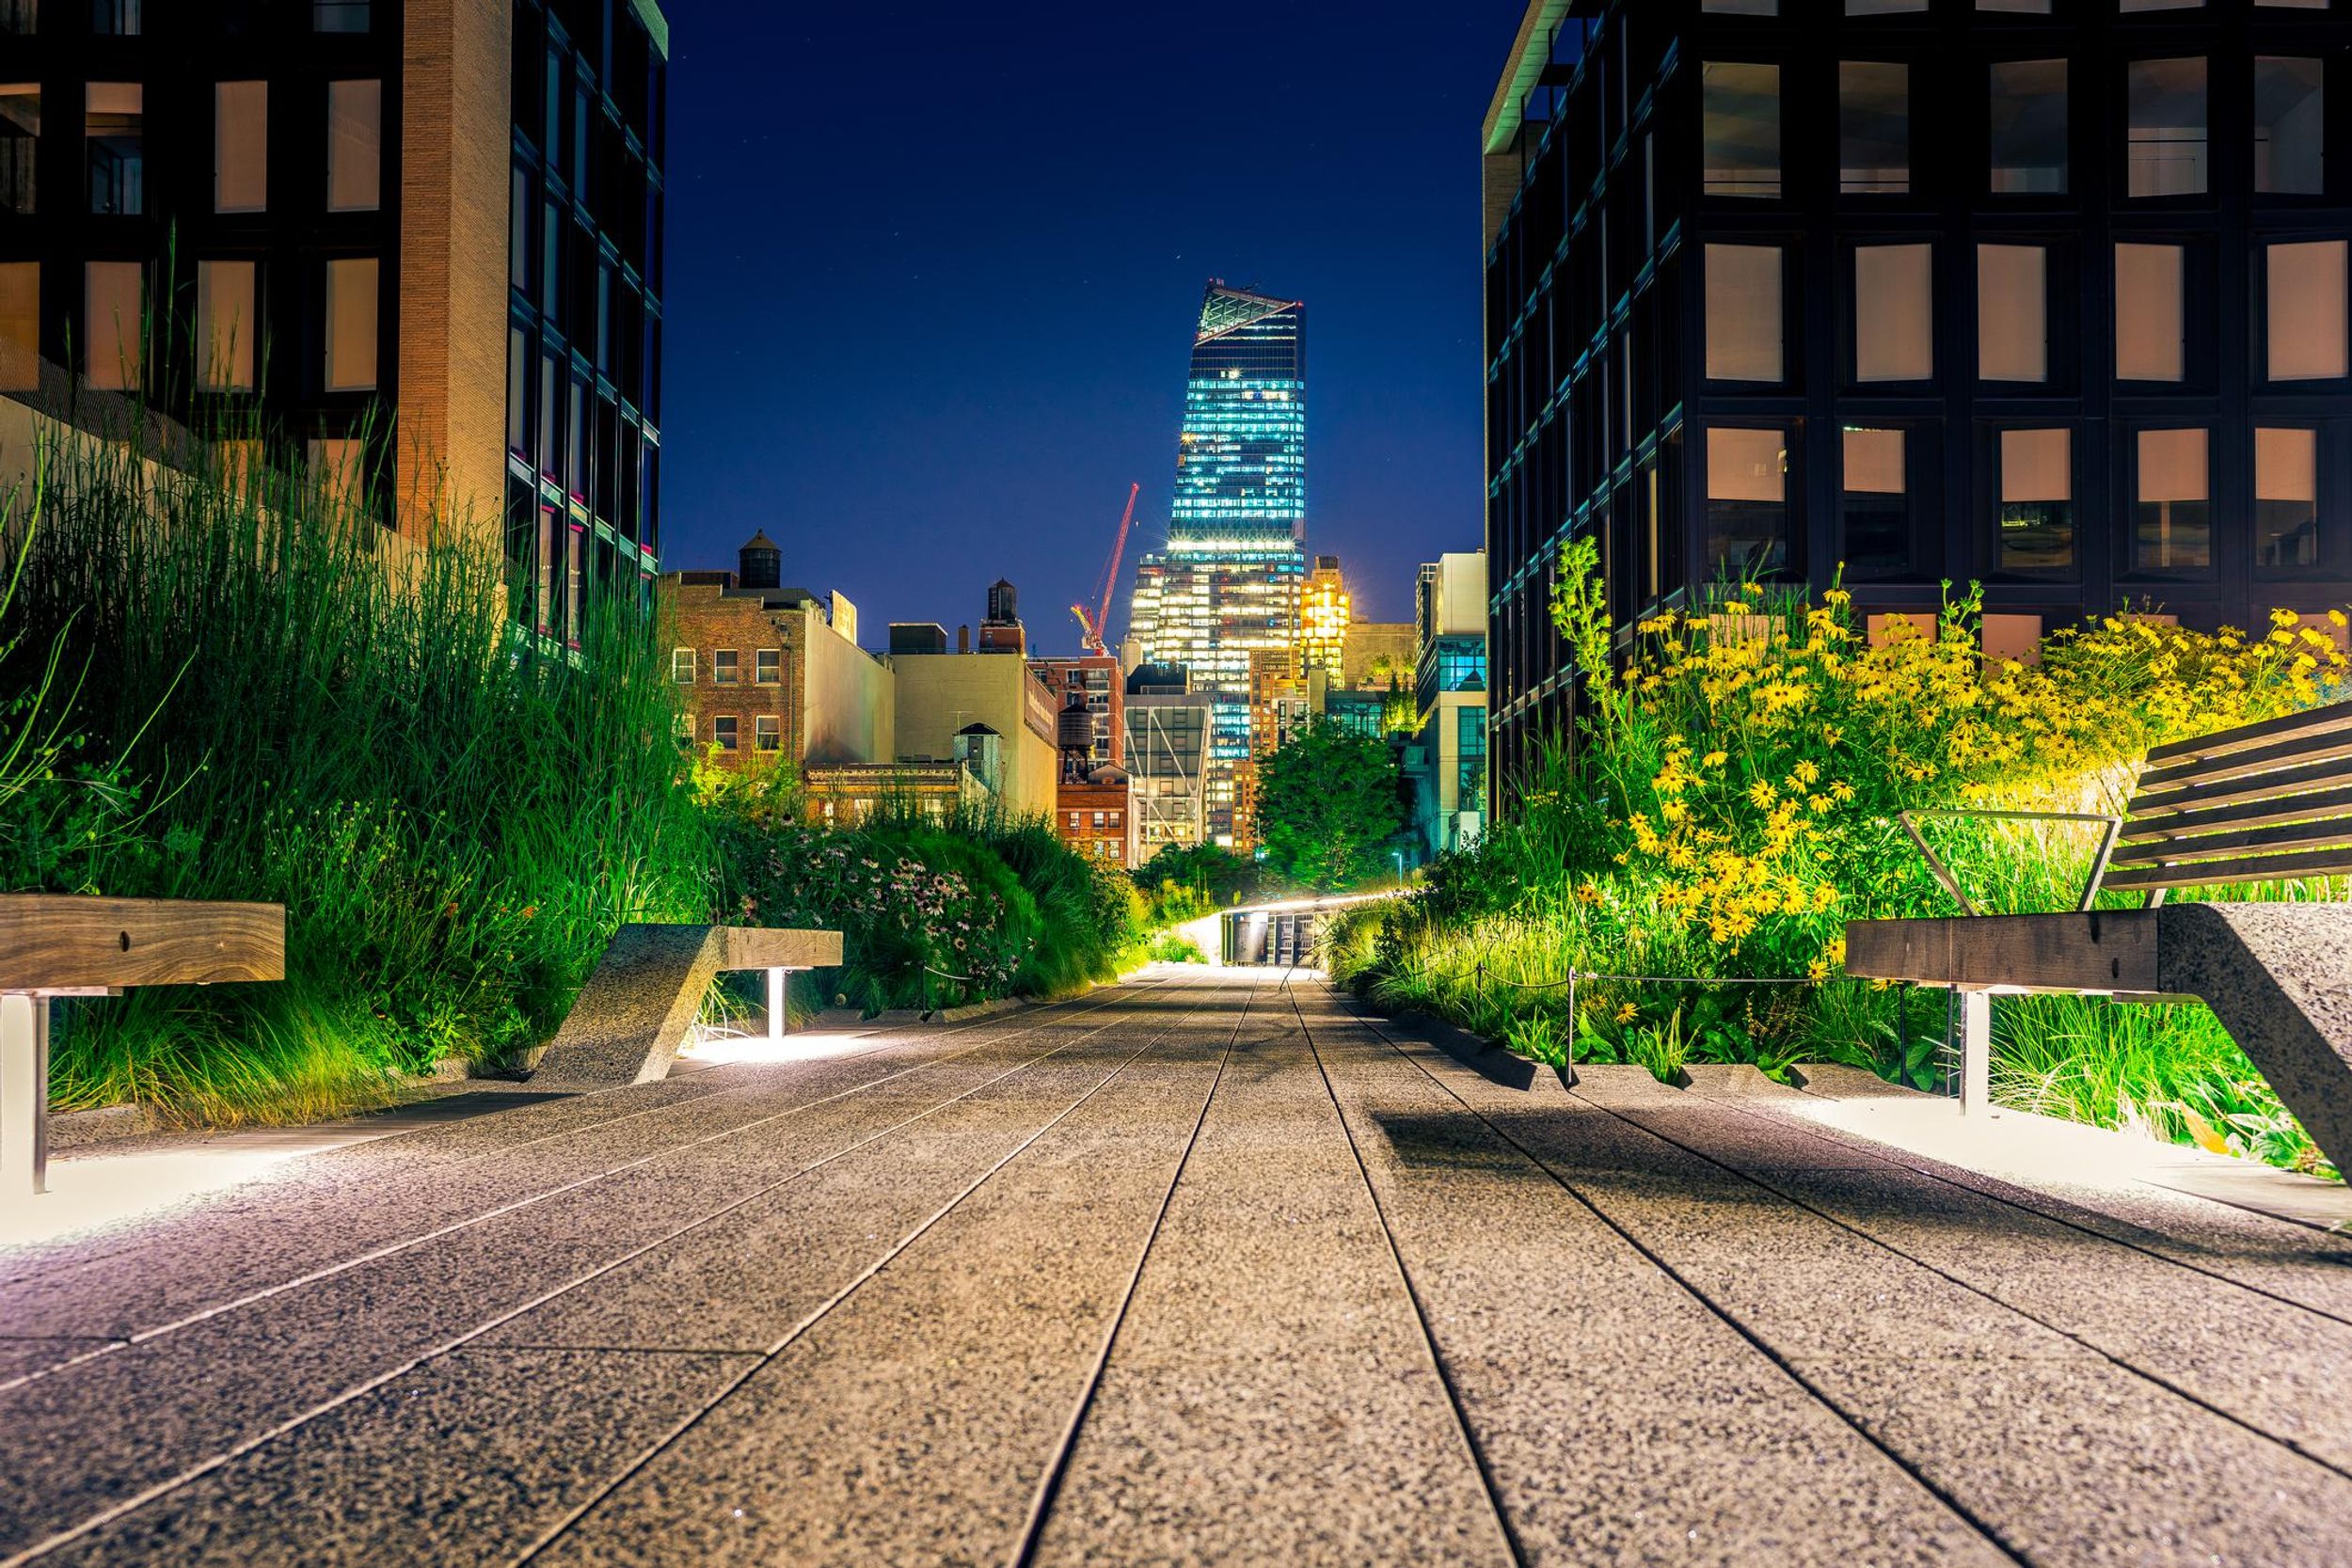 Landscaped walkway with an evening view of lighted office buildings